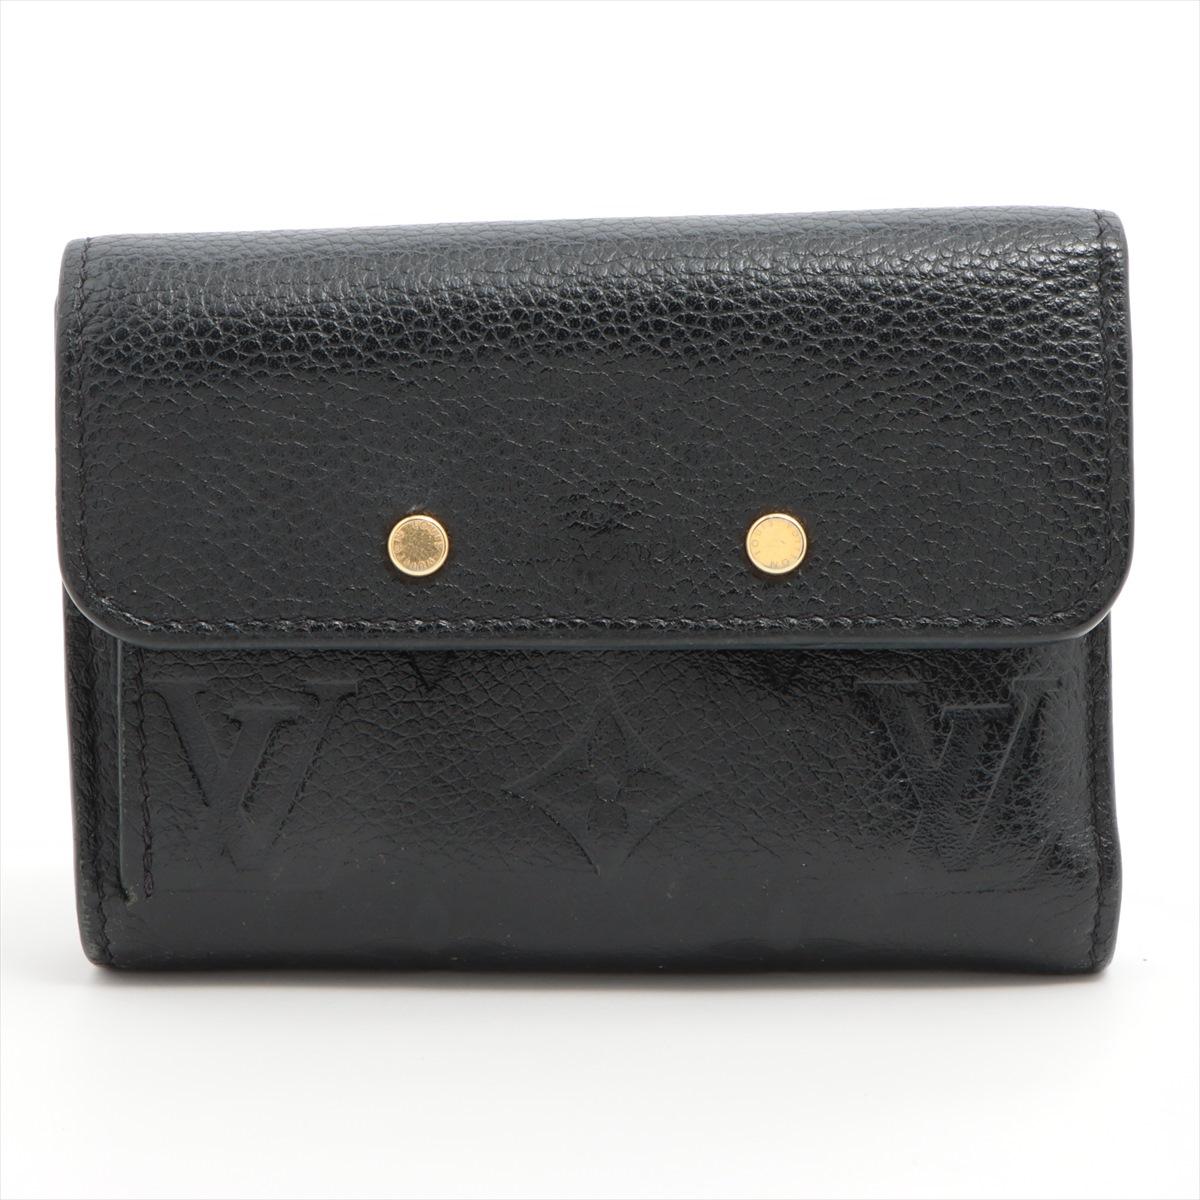 The Louis Vuitton Monogram Empreinte Pont Neuf Trifold Wallet in Black is a luxurious and practical accessory that exudes sophistication. Crafted from supple Monogram Empreinte leather, the wallet features a sleek black hue, adding a touch of